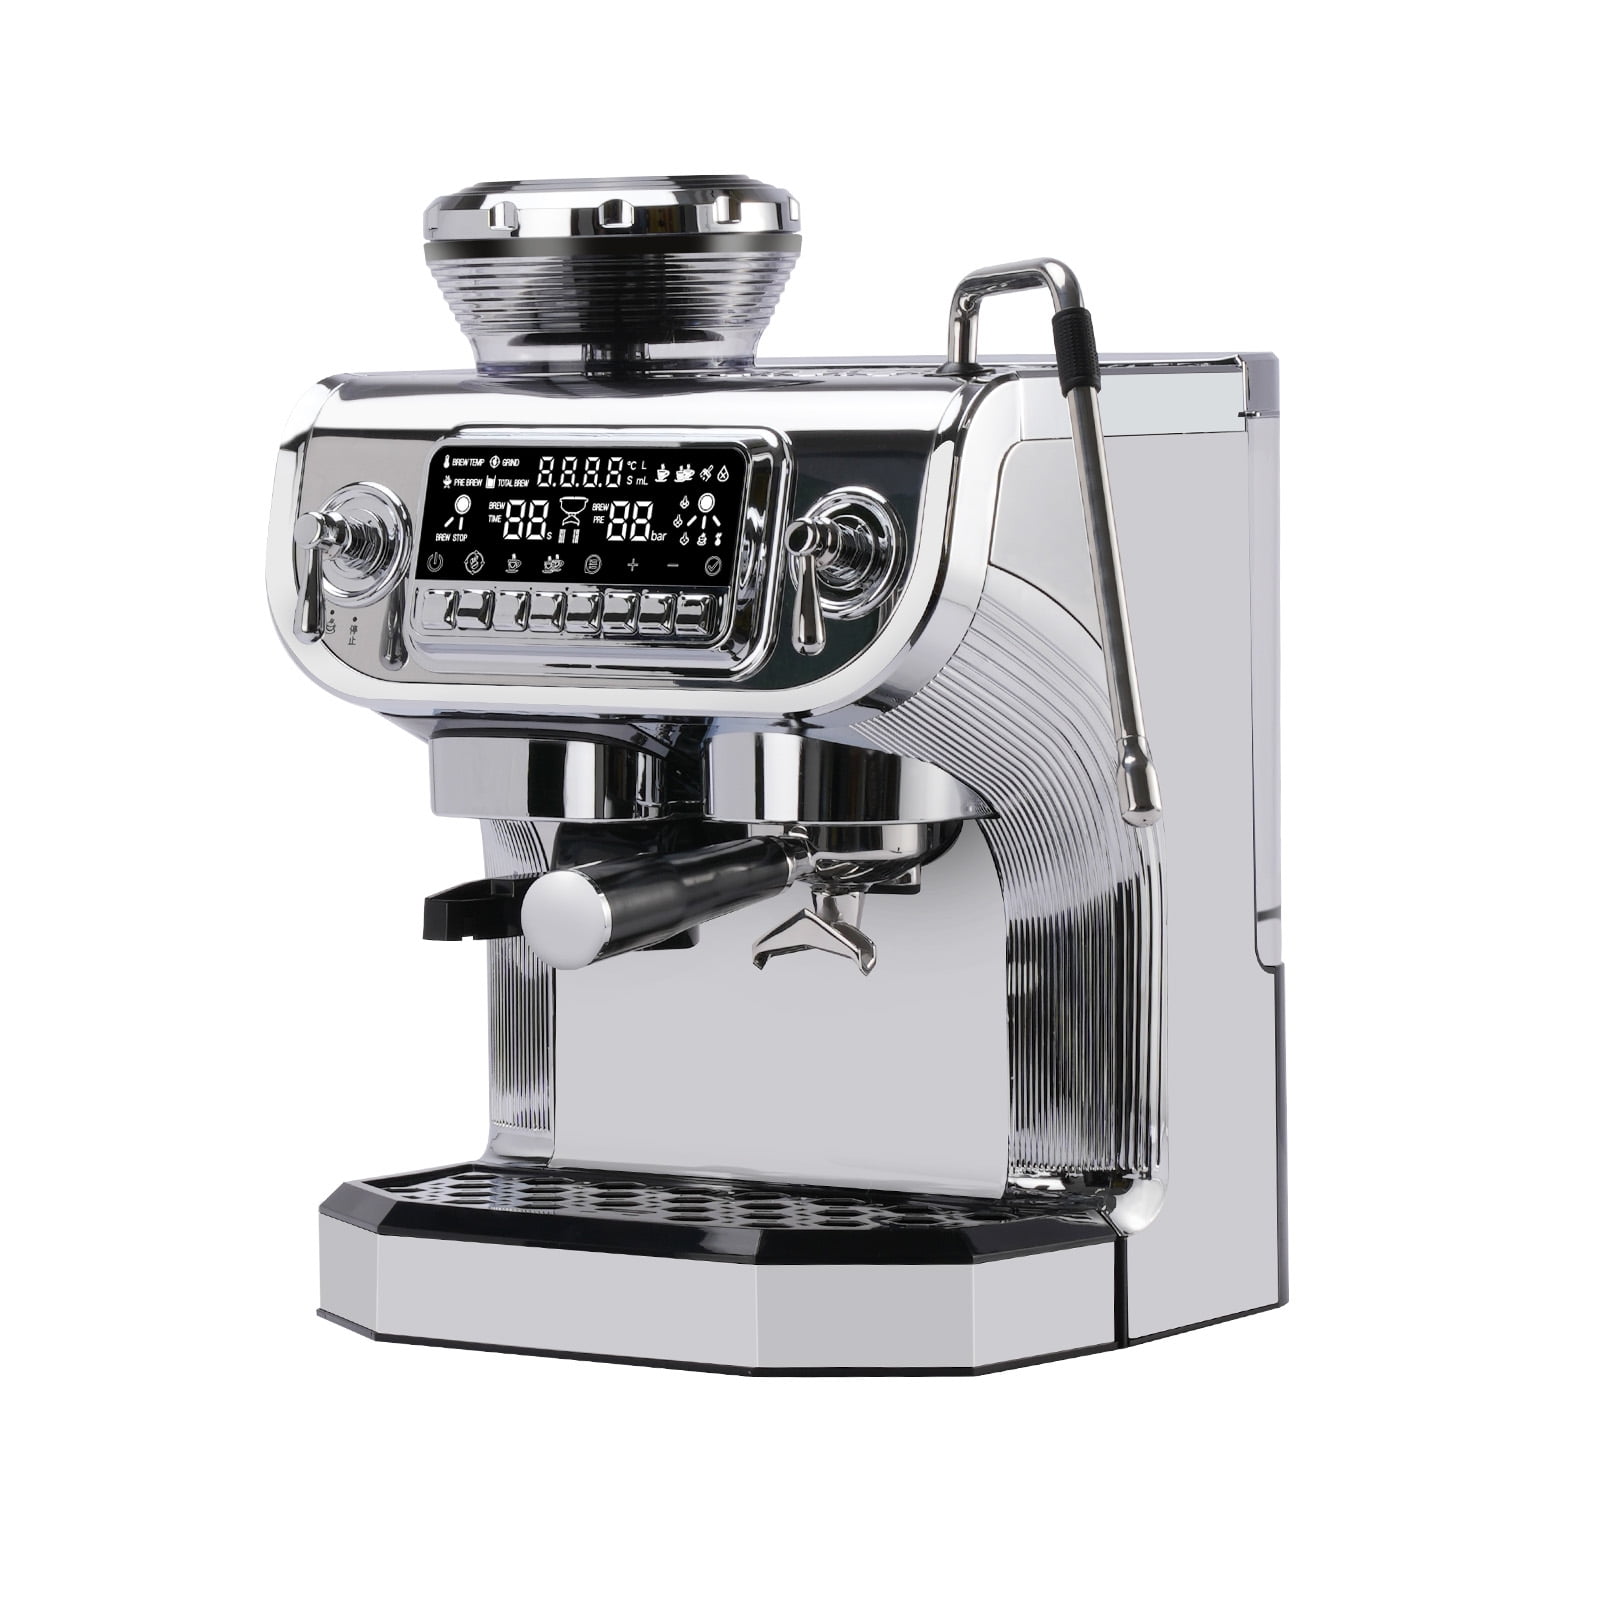 Mcilpoog ES317 Fully Automatic Espresso Machine，Milk Frother,Built-in  Grinder，Intuitive Touch Display ，7 Coffee Varieties for Home, Office,and  more